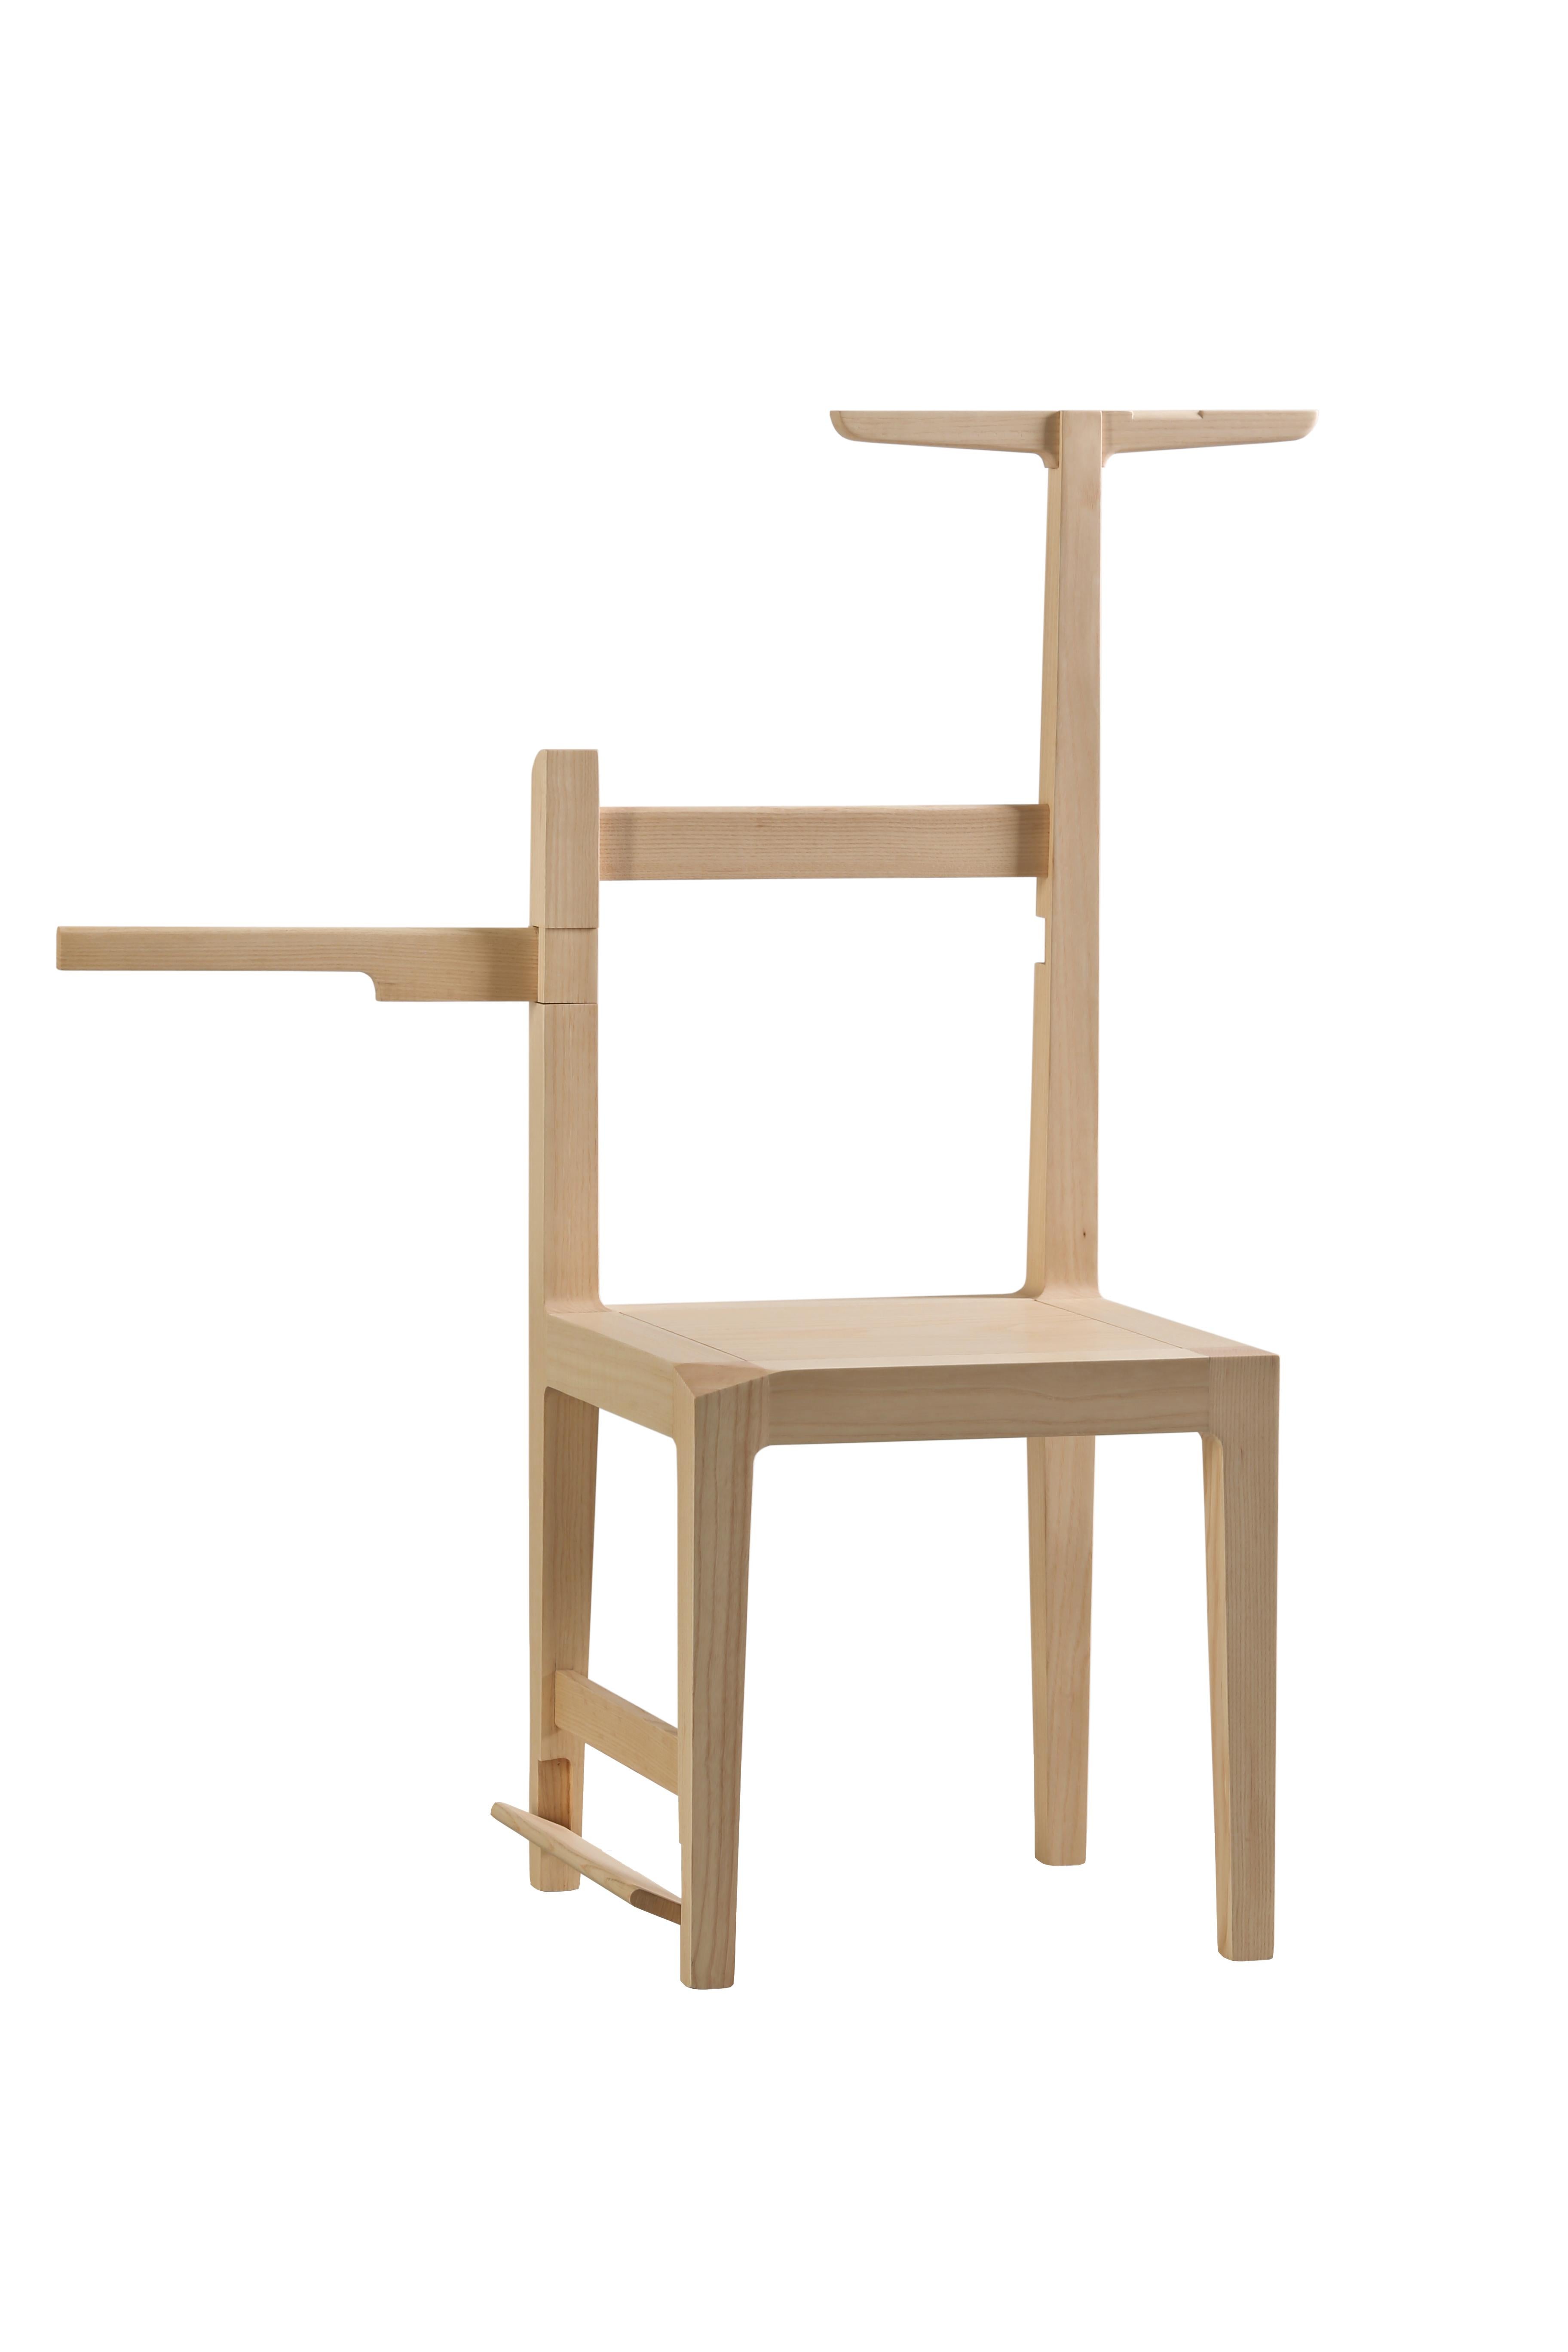 As the winning project of the 11th edition of the “Significant Furniture” Competition, the Metamorfosi has turned real: a chair – clothes rack made of ash. Each part of the chair makes it multifunctional; the back becomes a trouser rack, and the